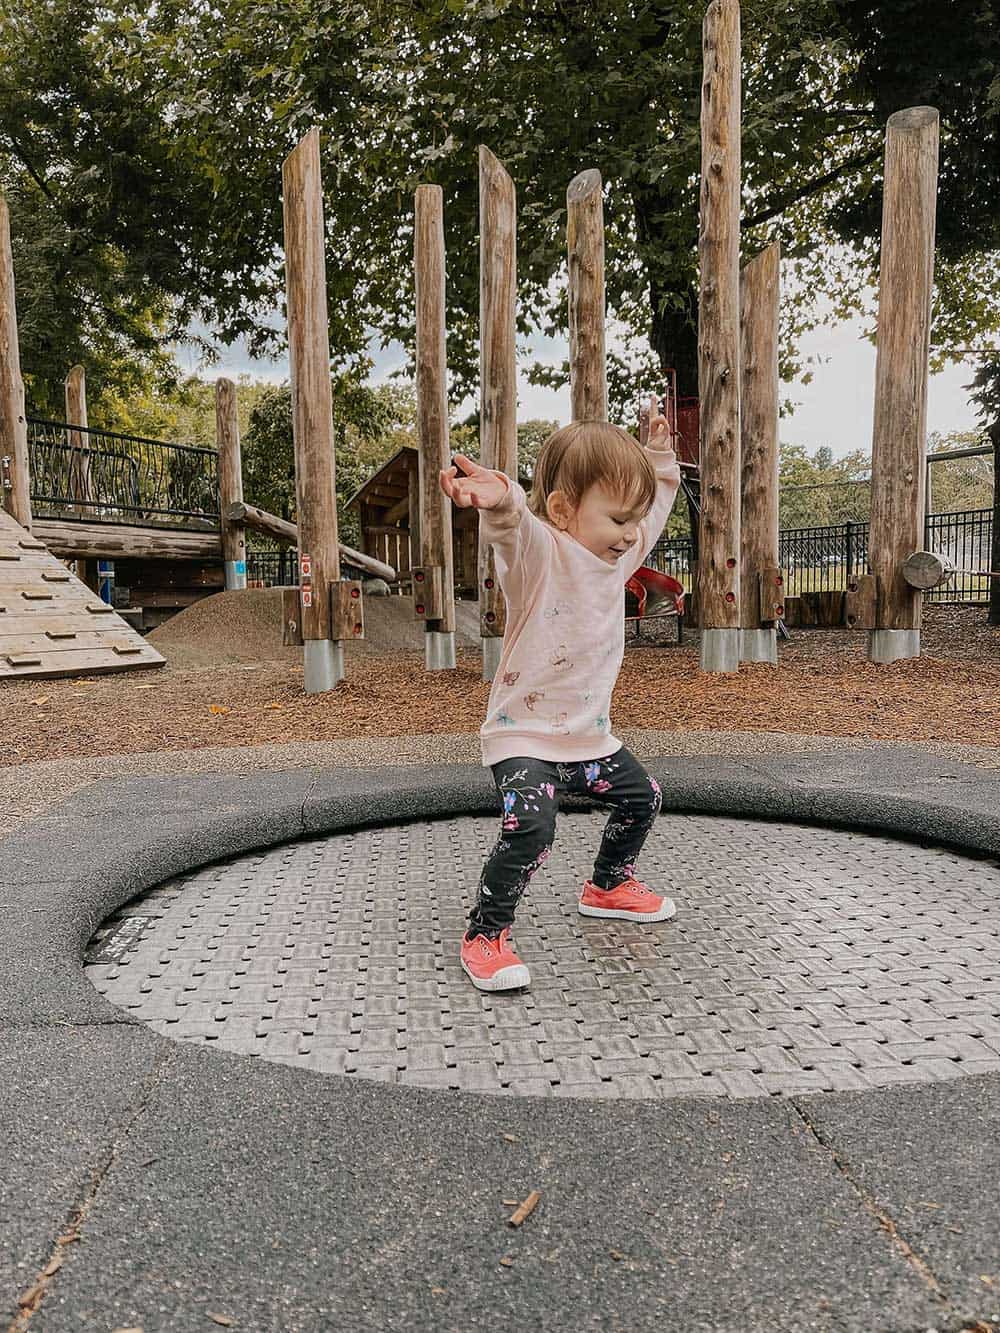 The Best Playgrounds for Kids in Vancouver